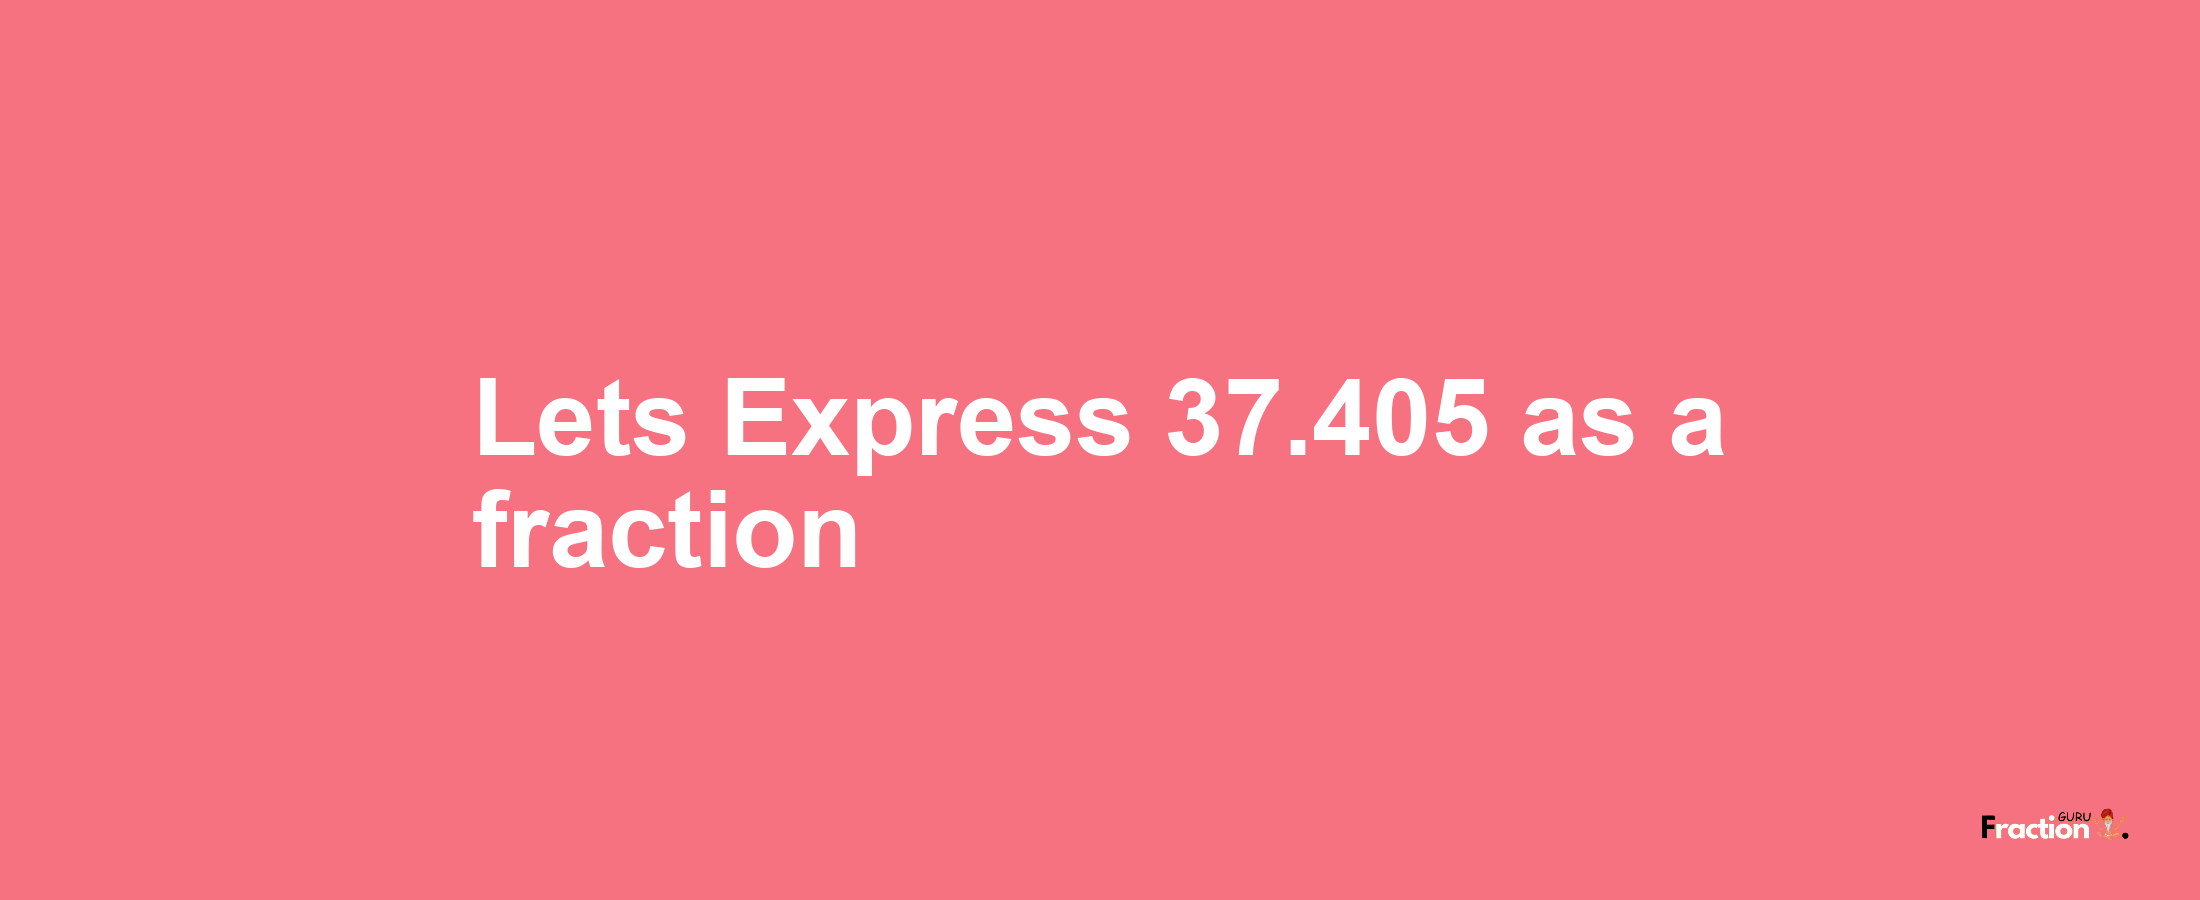 Lets Express 37.405 as afraction